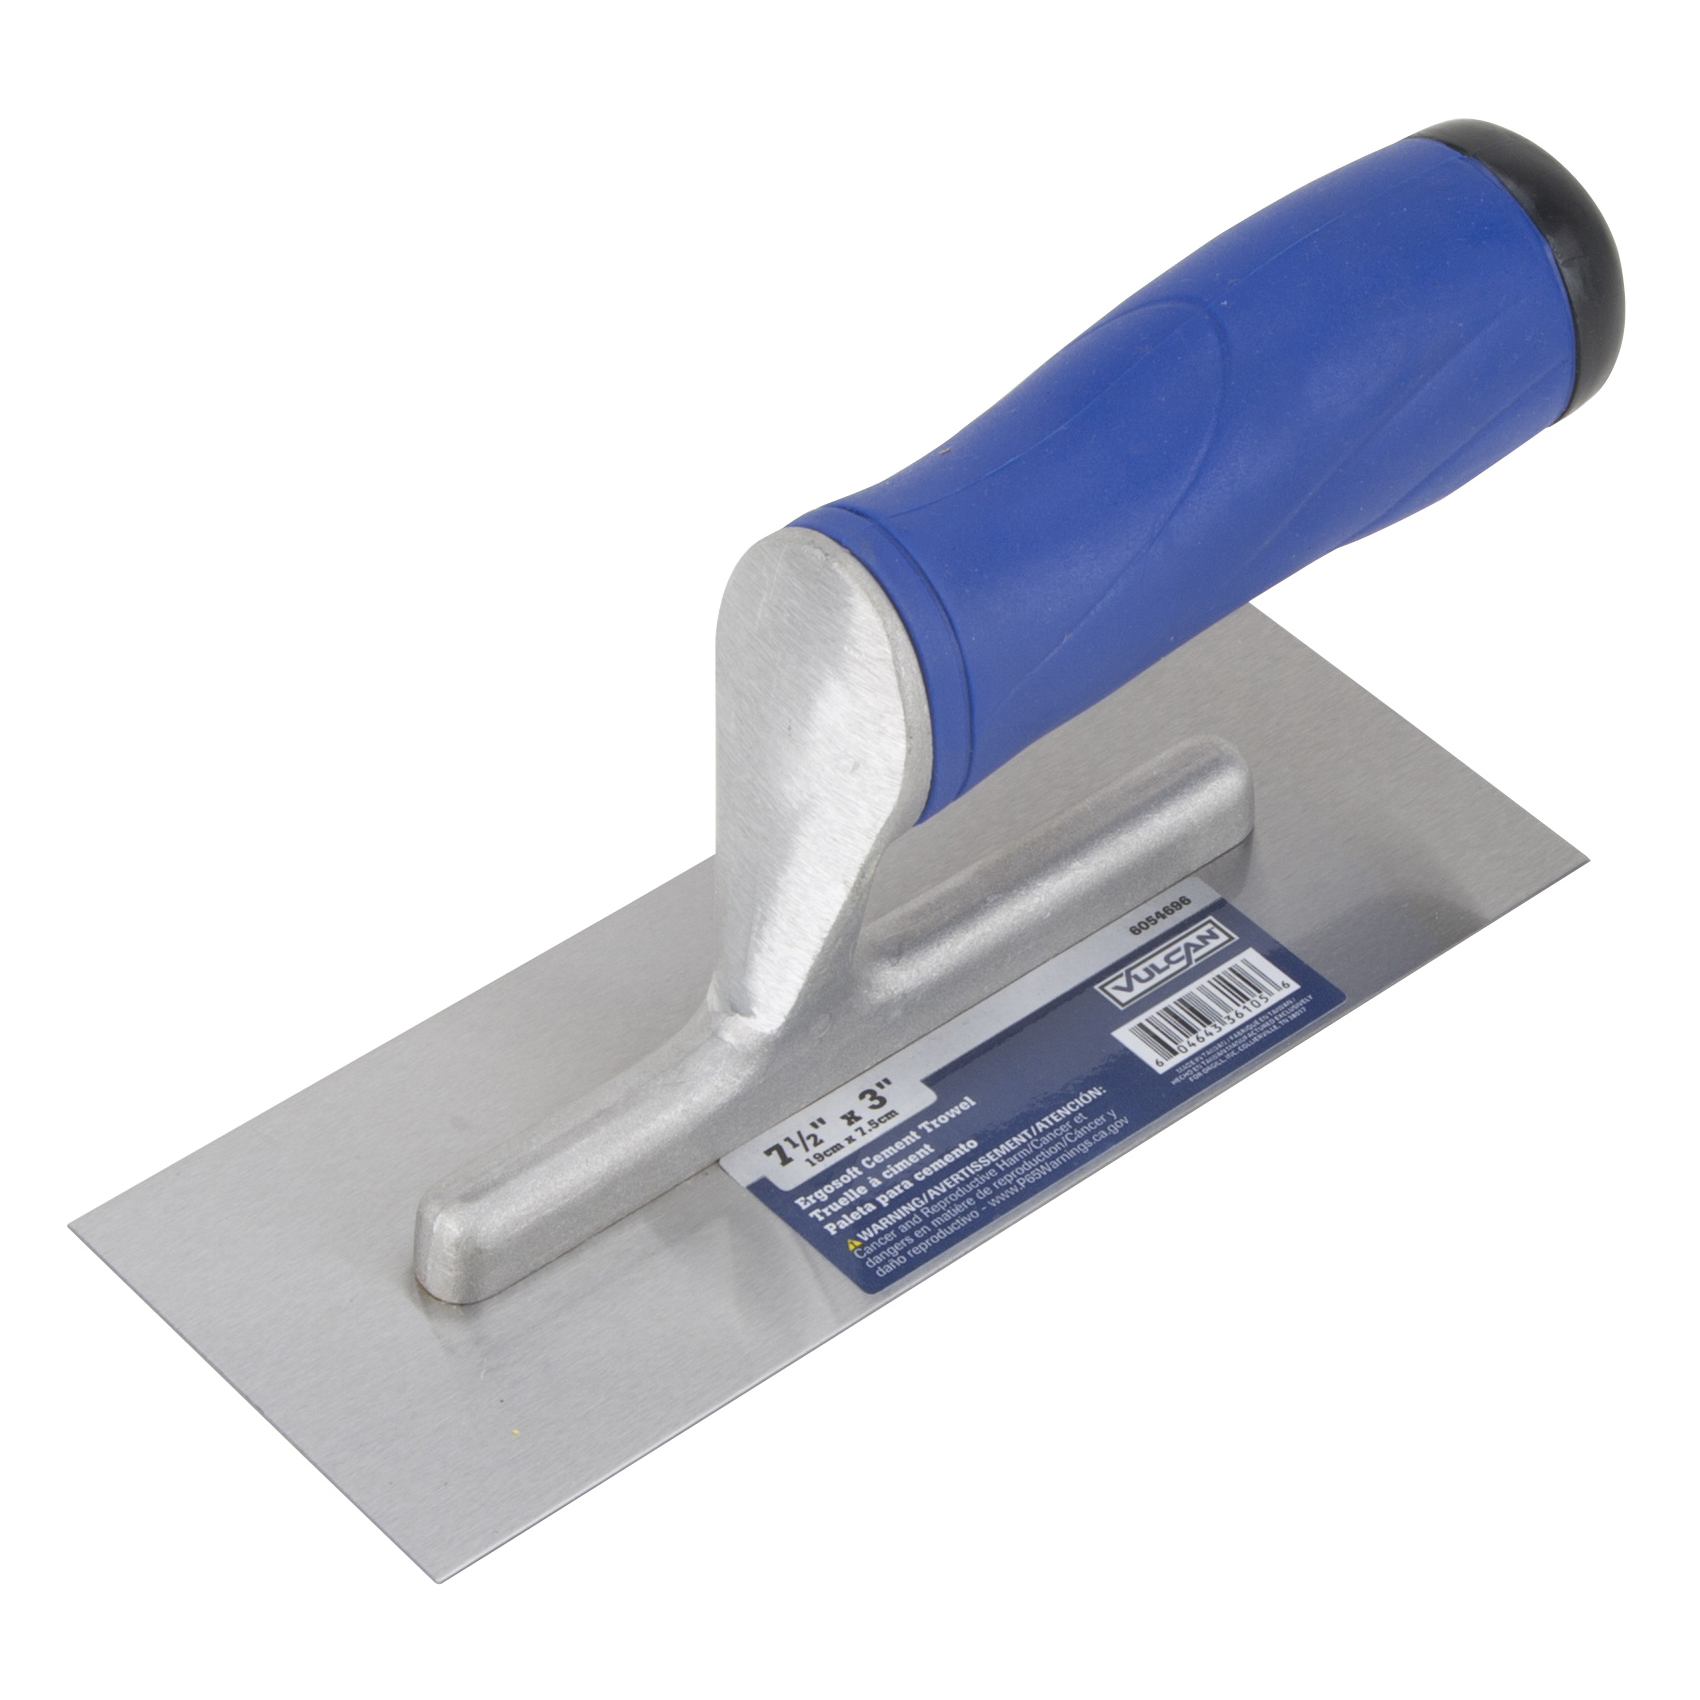 36105 Cement Trowel, 7.5 in L Blade, 3 in W Blade, Right Angle End, Ergonomic Handle, Plastic Handle